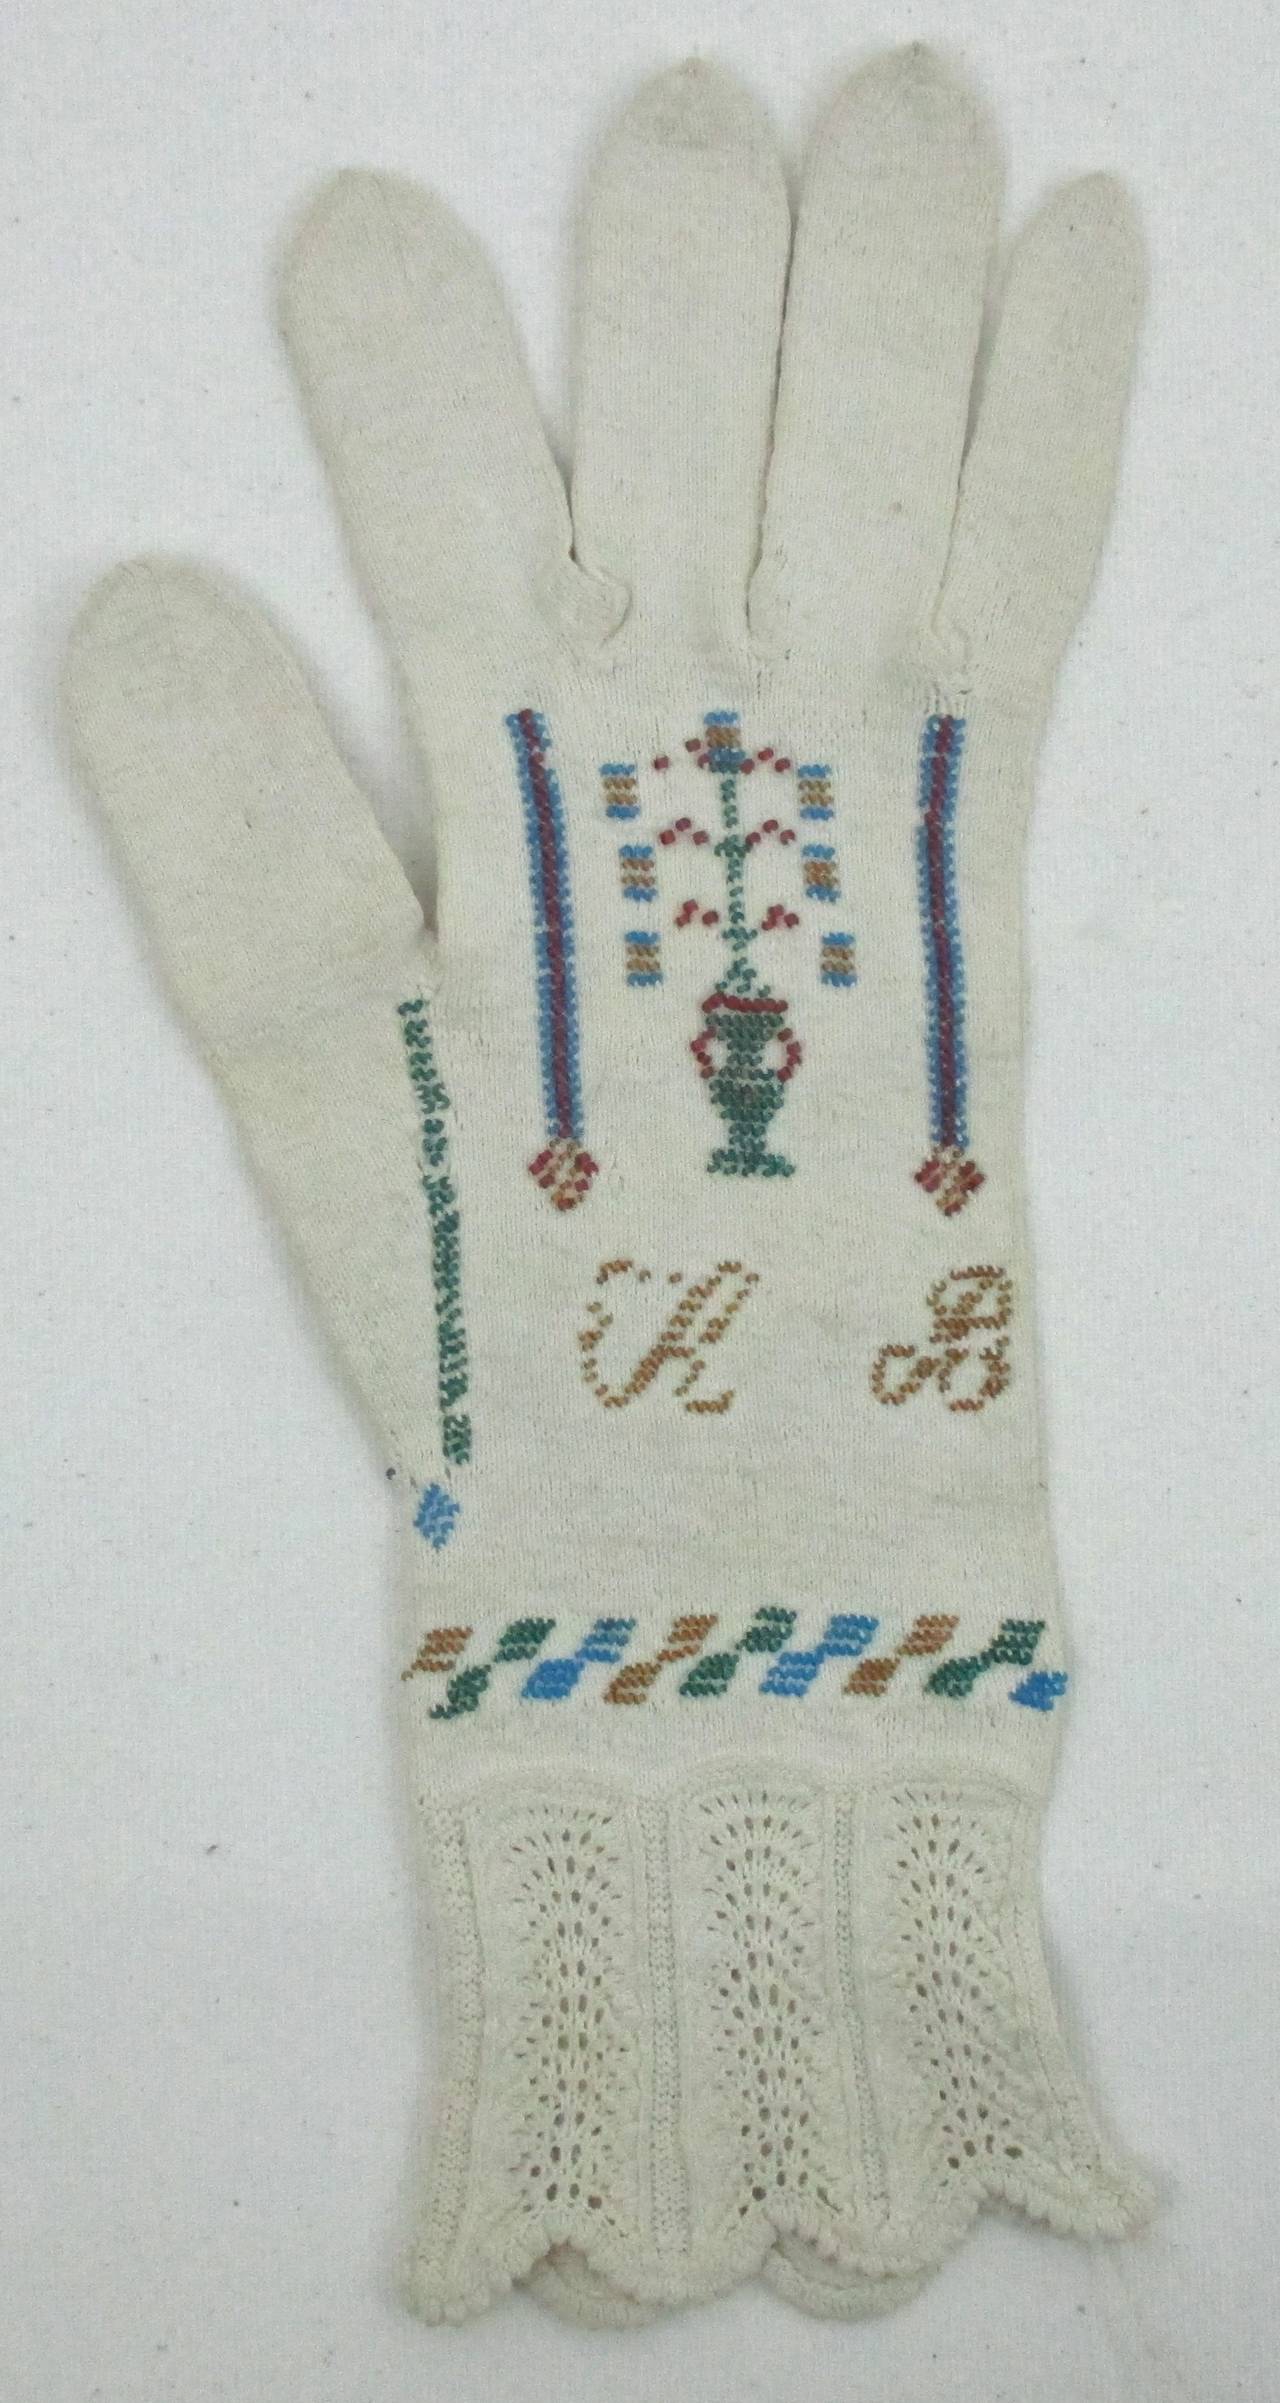 Very good condition knitted cotton glove with the date 1837 in glass beads on the palm and a tree and initials on the back hand and knitted pattern lace on the wrist. This glove is very similar to a pair in the Boston Museum of Fine Arts, Elizabeth